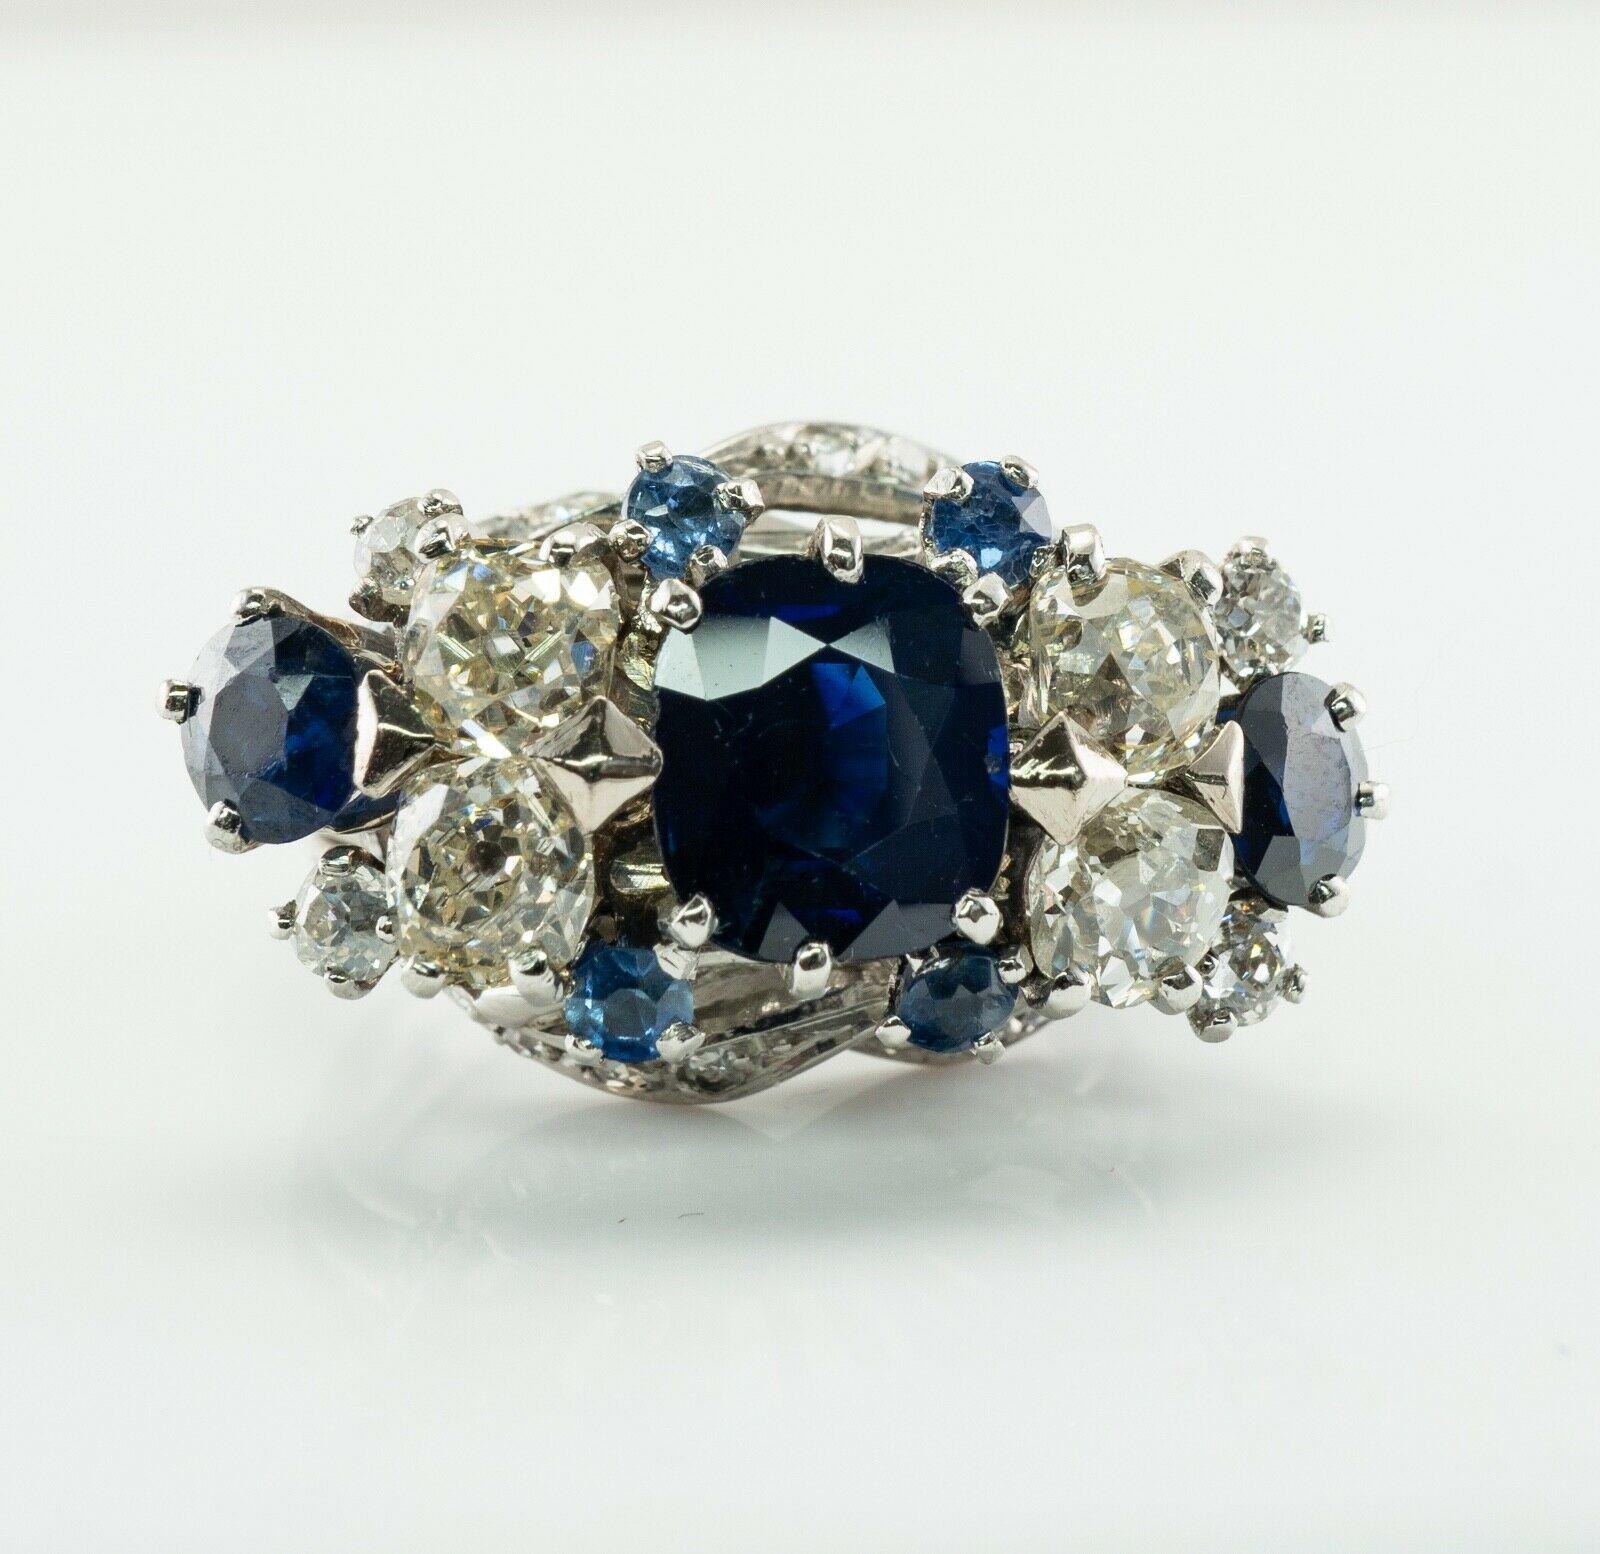 This vintage ring is finely crafted in solid 18K White Gold (carefully tested and guaranteed). The center natural Earth mined Sapphire measures 9x7mm (2.20 carats). Two round cut sapphires are 5mm each. These gems are intense dark blue stones. They